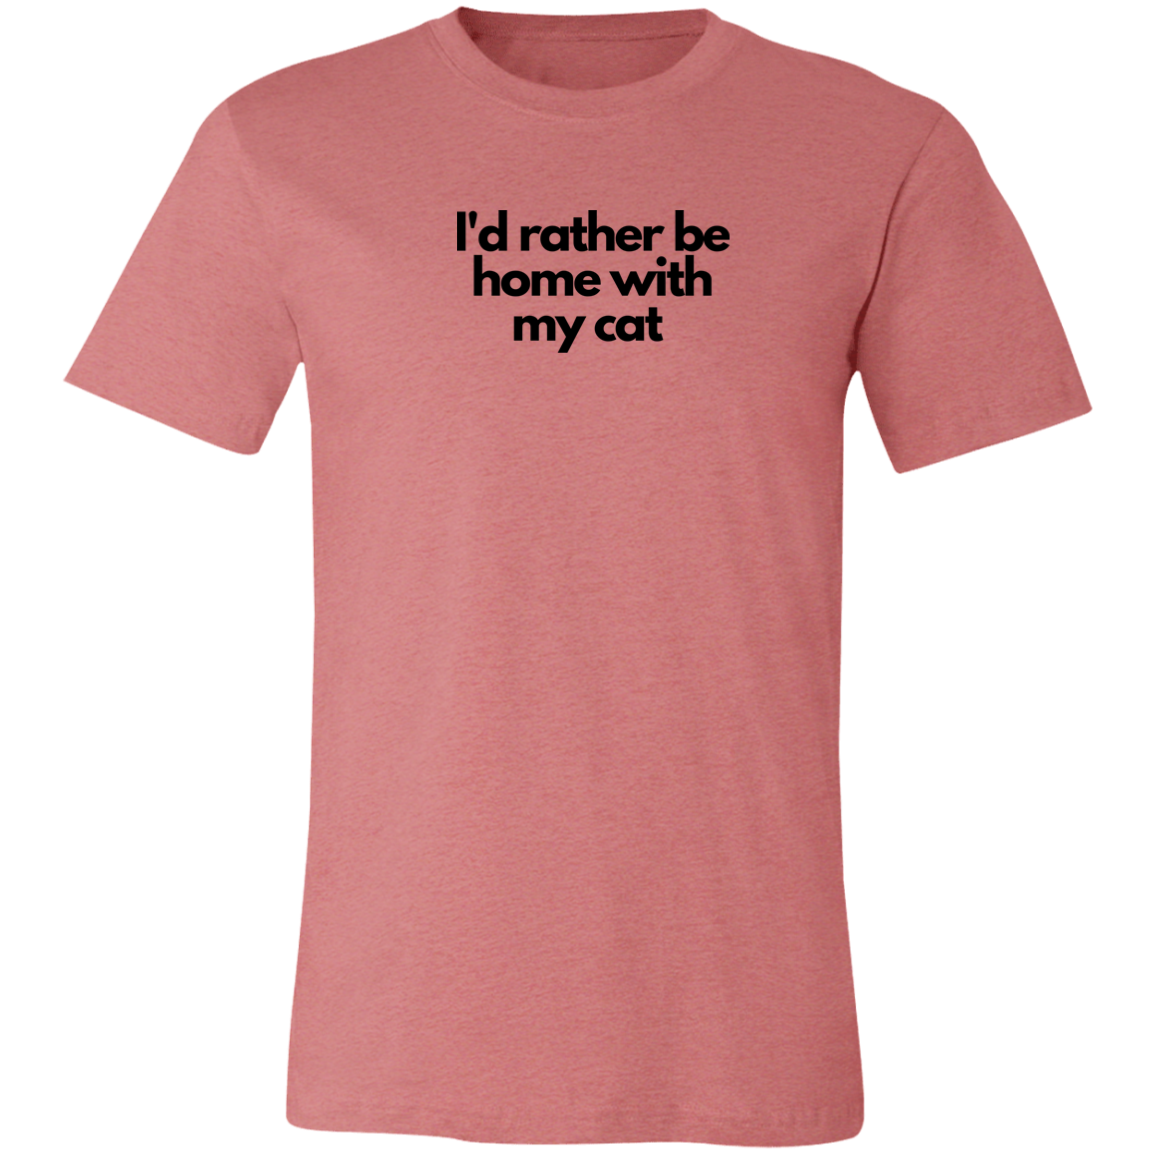 ‘I’d rather be home with my cat’ Unisex Jersey Short-Sleeve T-Shirt